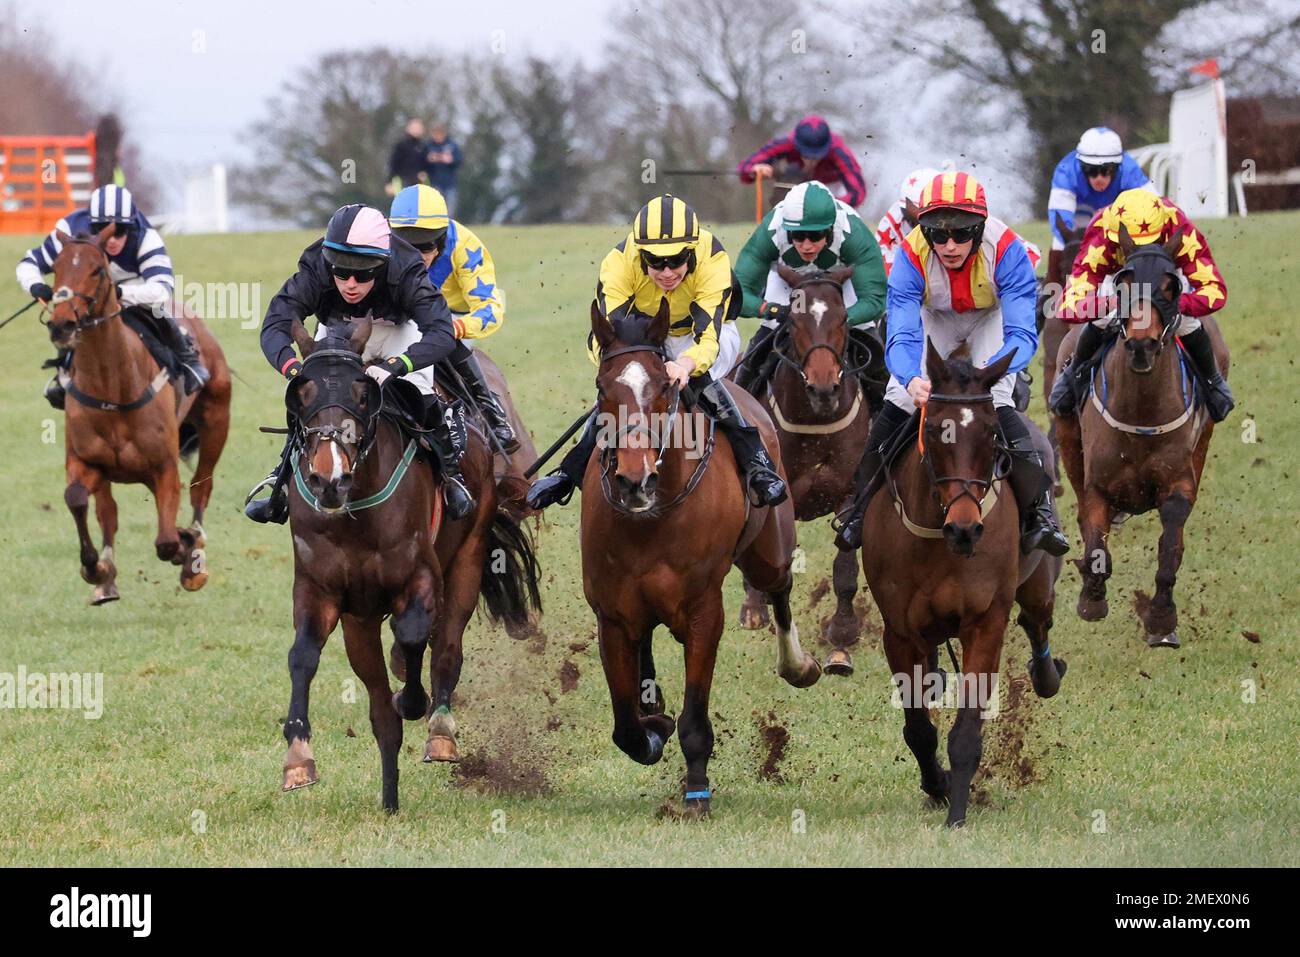 Down Royal Racecourse, Lisburn, Northern Ireland, UK. 24 Jan 2023. Aspall Handicap Chase. National Hunt racing January 2023. Race won by Wee Small Hours (11 – red/yellow helmet) ridden by  jockey Dillon Maxwell, trainer M M Rice. Front three (l-r) Monoxide, Garri Phaidin, and Wee Small Hours. Credit: CAZIMB/Alamy Live News. Stock Photo